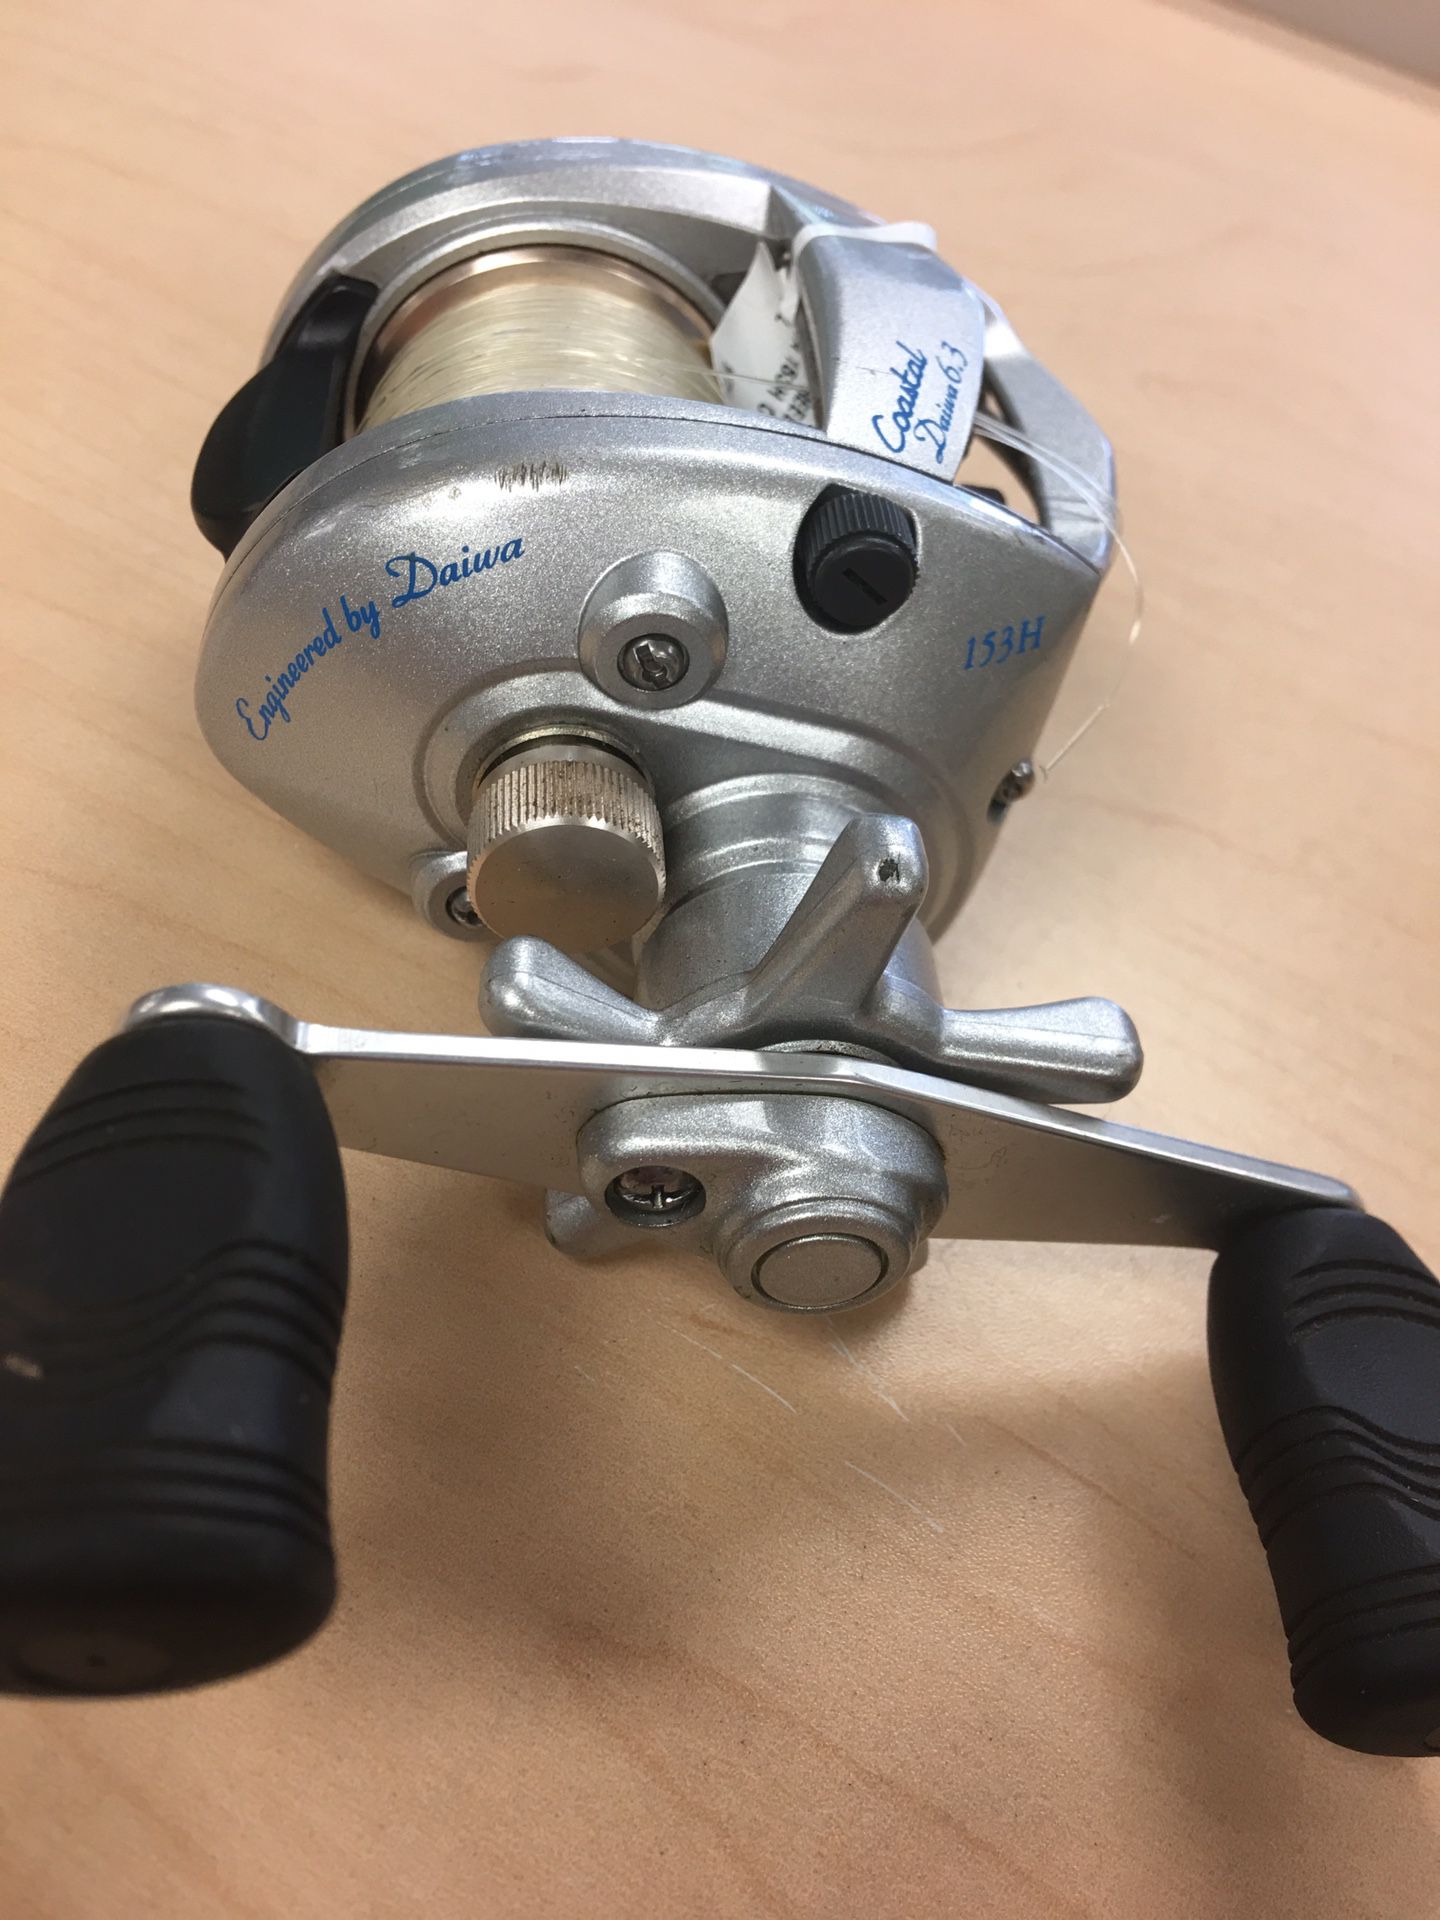 Daiwa 153H Coastal Inshore Special Fishing Reel for Sale in San Diego, CA -  OfferUp